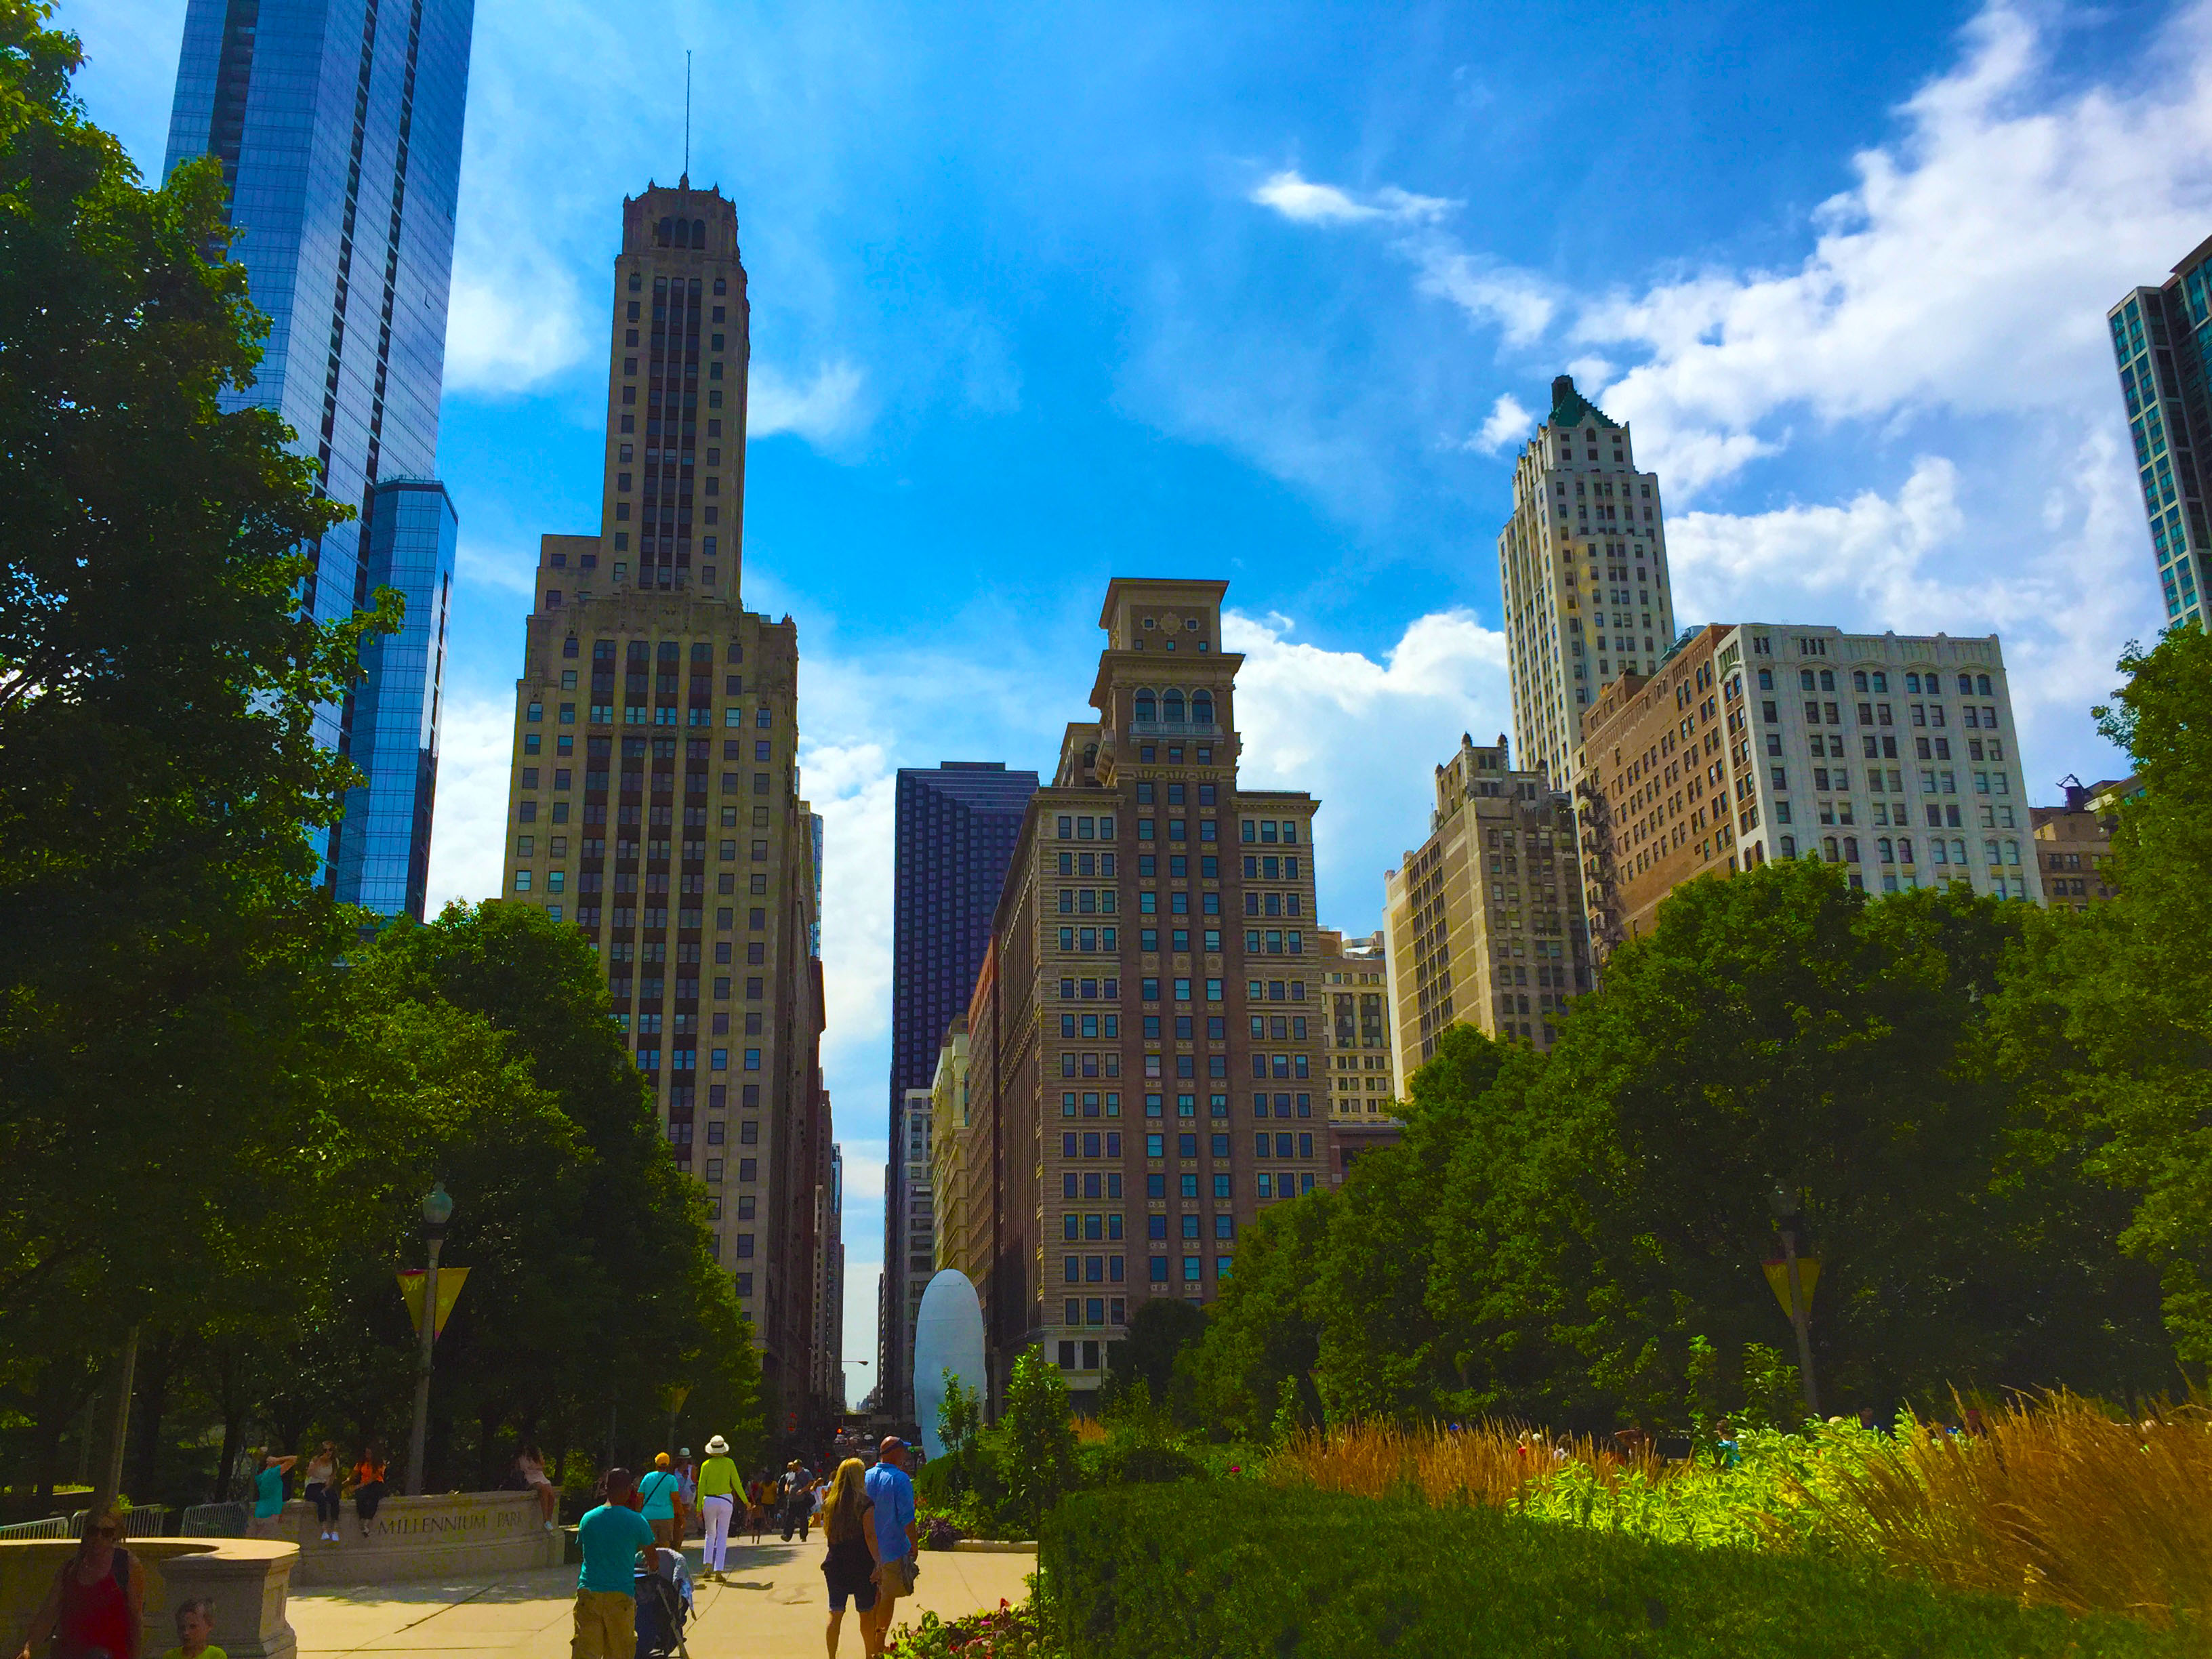 Hamptons to Hollywood - Travel Chicago Lifestyle by Kyle Langan